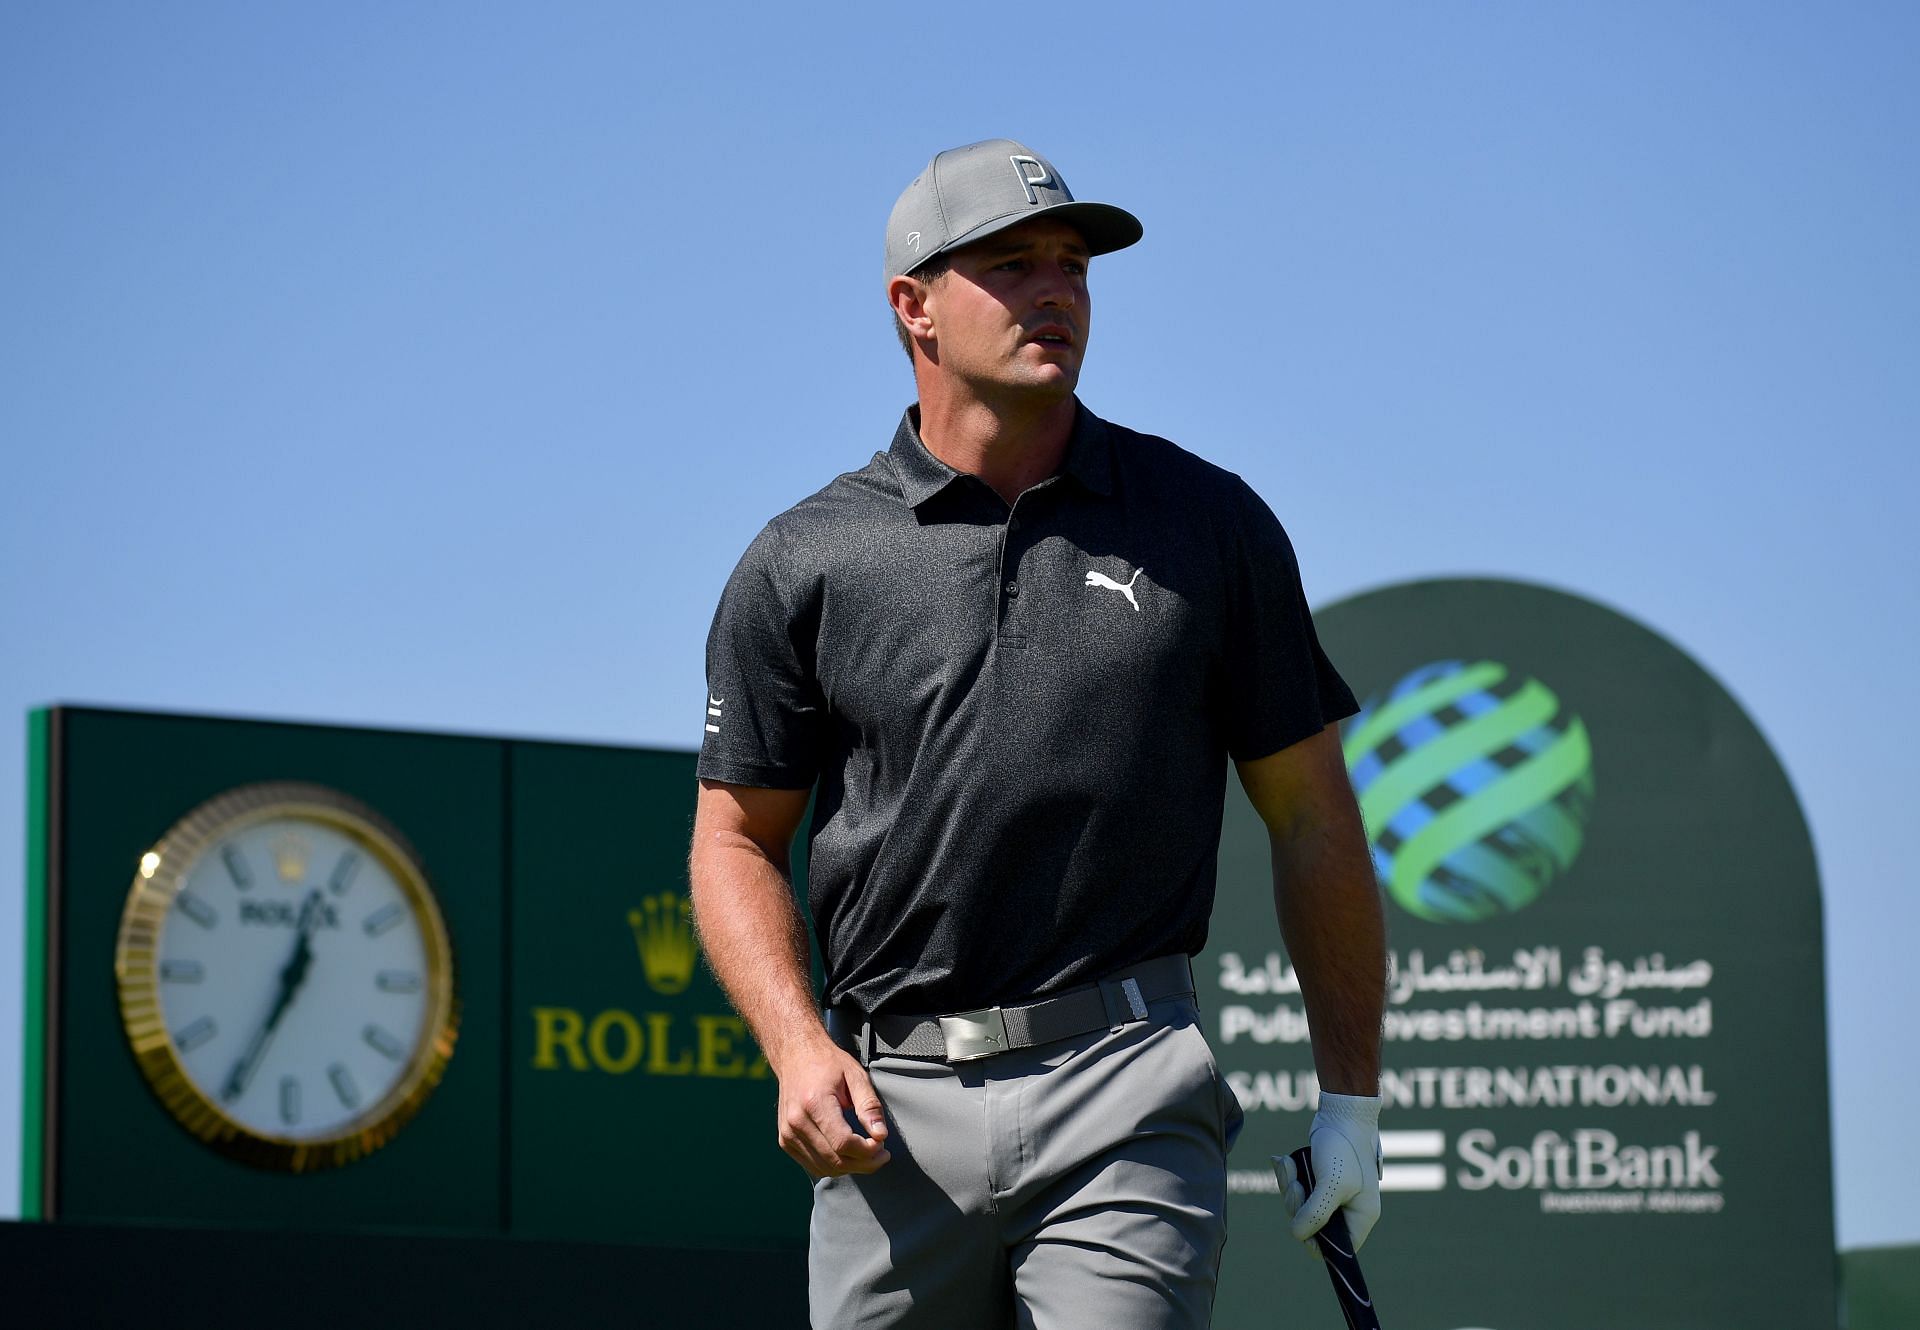 Bryson DeChambeau will be competing in the 2023 Masters